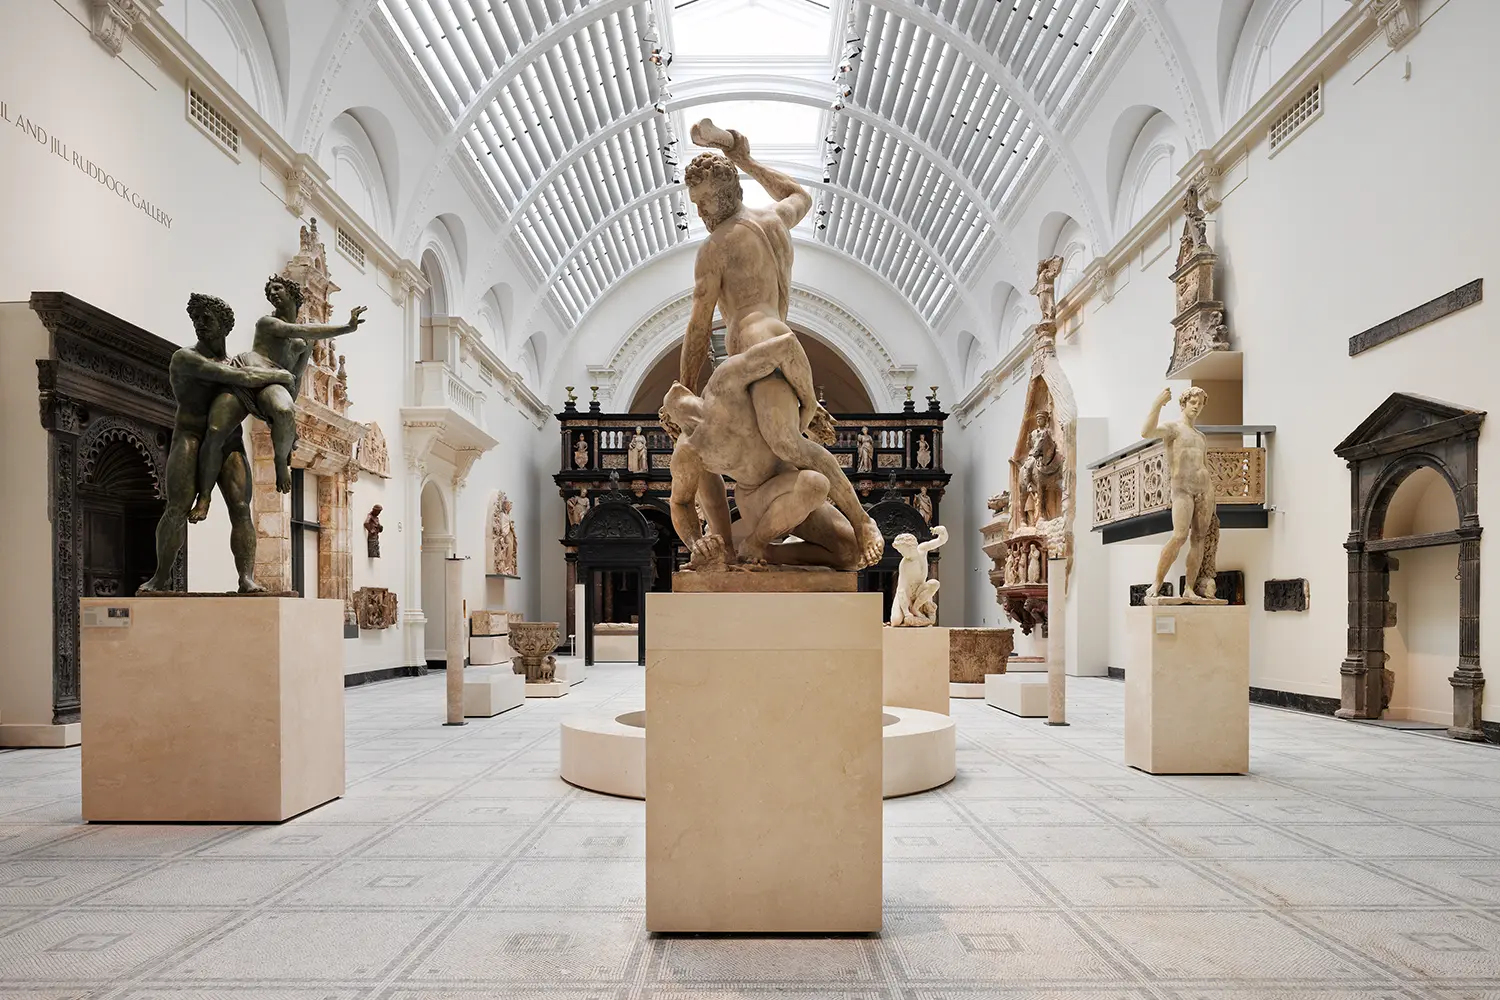 The Renaissance City in the Victoria and Albert Museum in London, UK